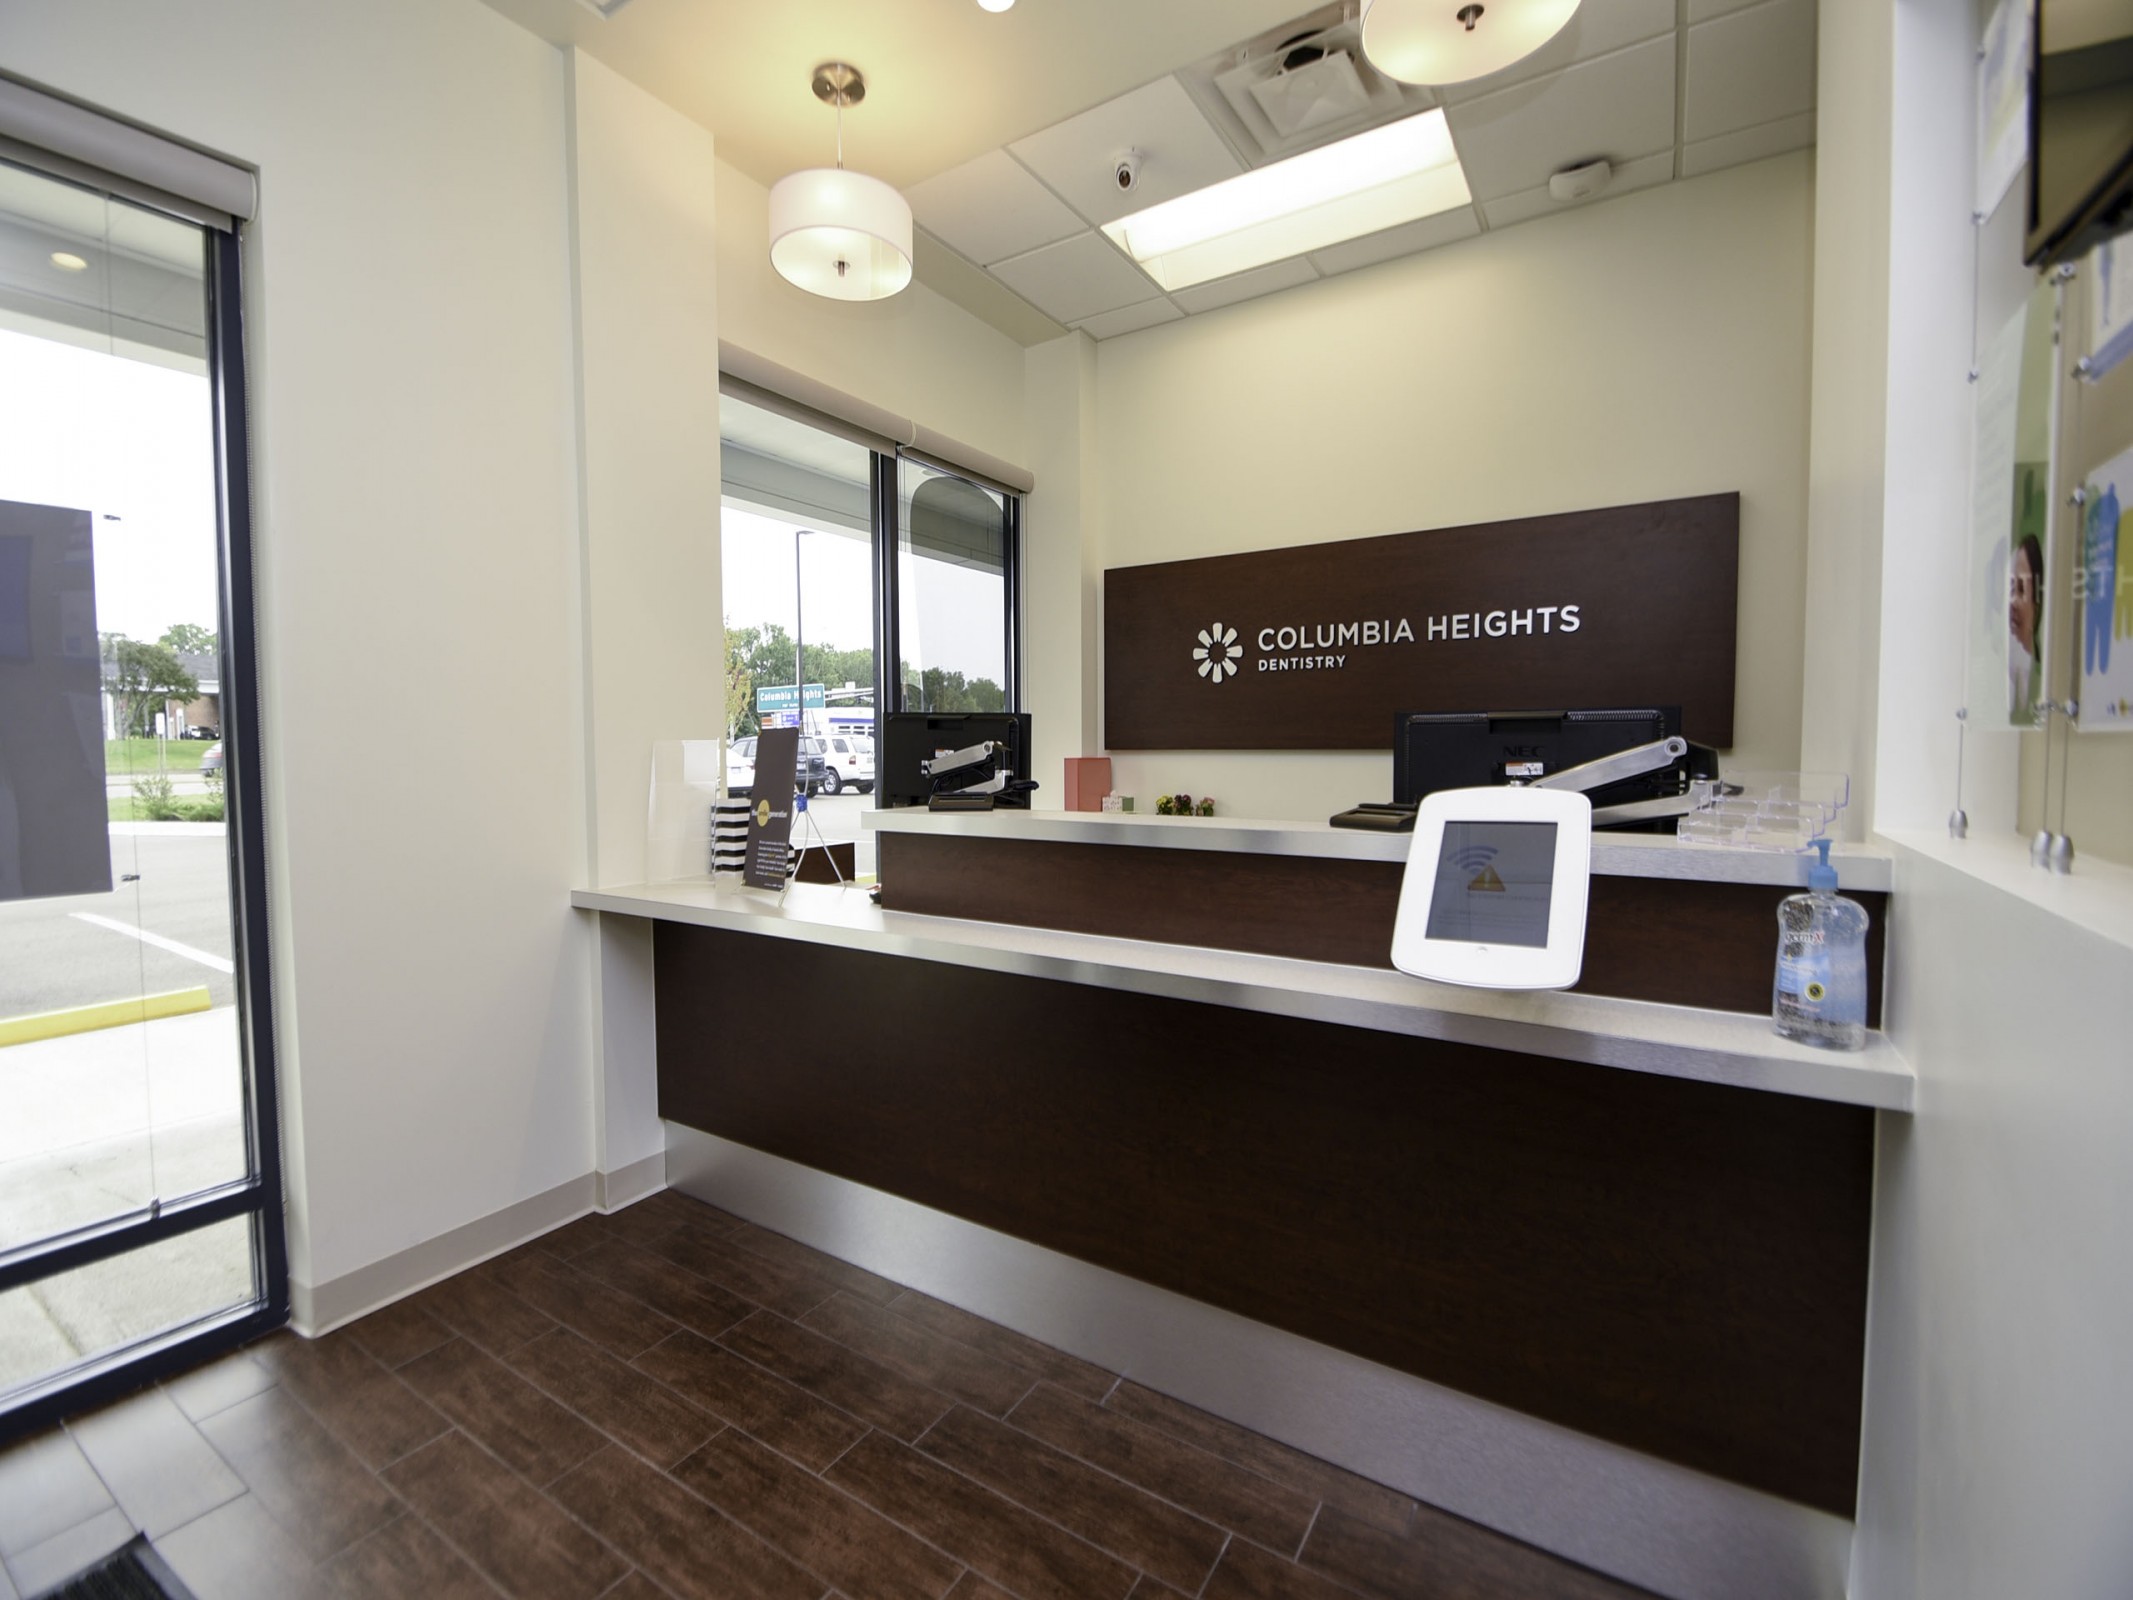 Columbia Heights Dentistry opened its doors to the Columbia Heights community in June 2016.